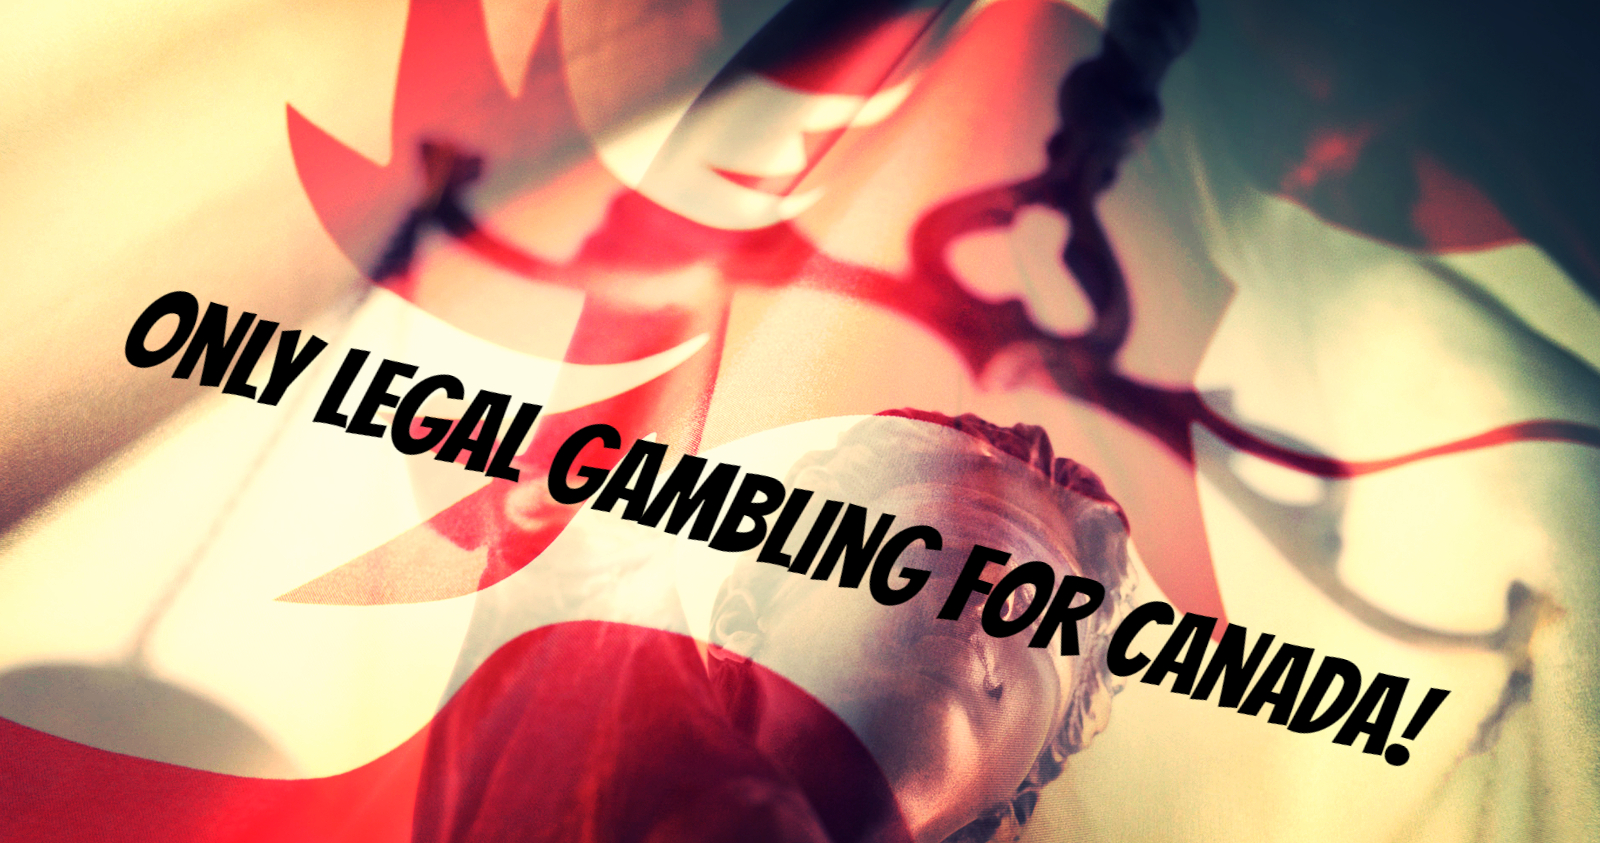 Legal Gaming Sites - Know Where to Find